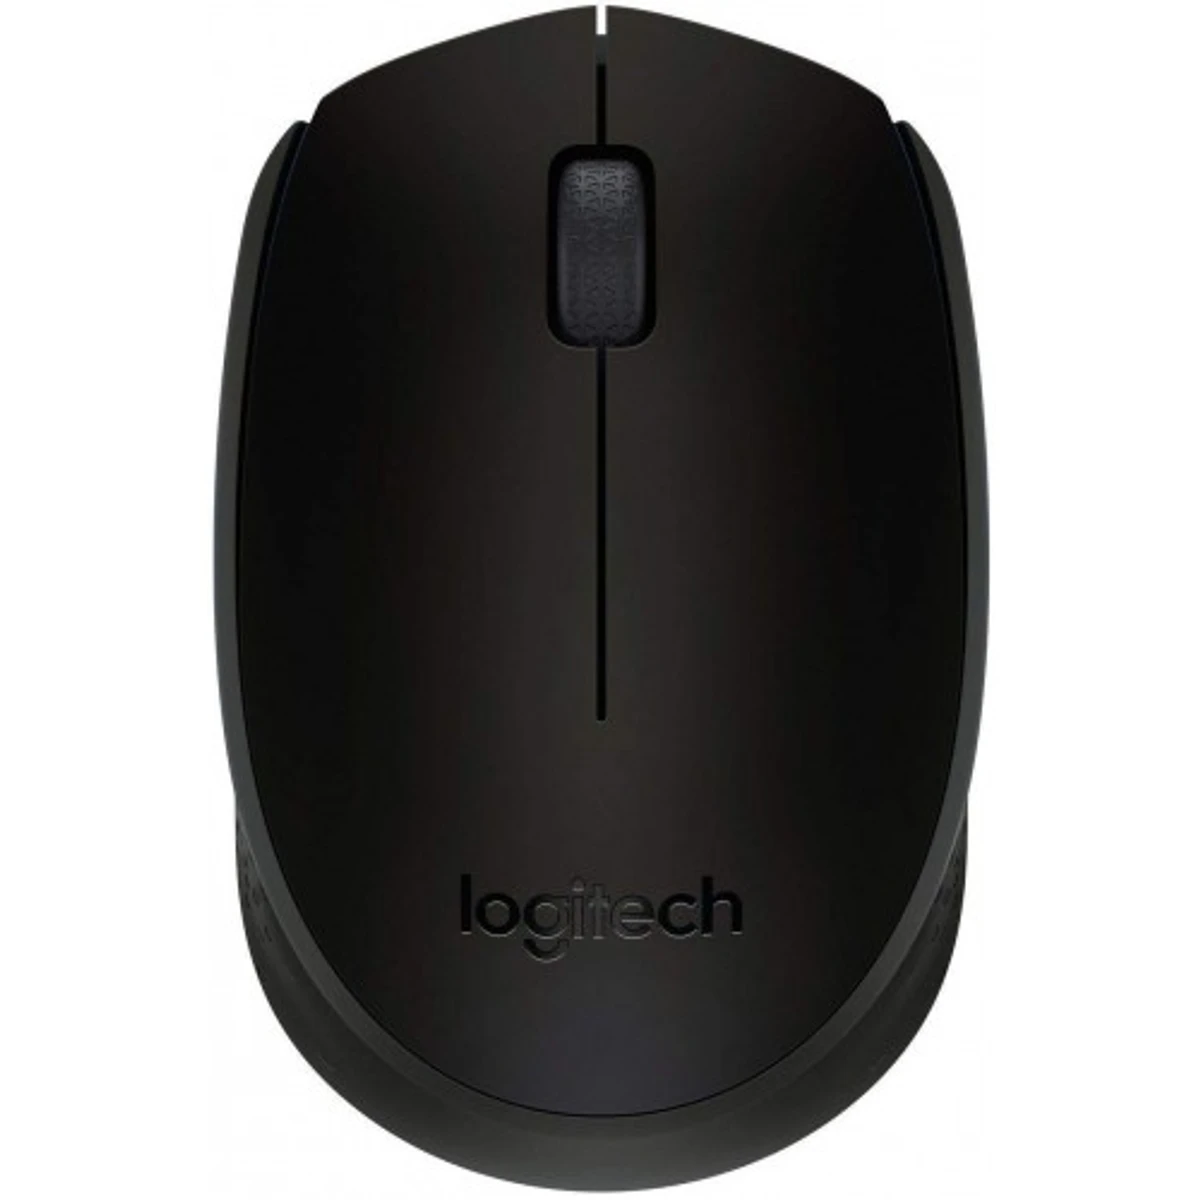 Logitech B170 is an affordable wireless mouse with reliable connectivity,